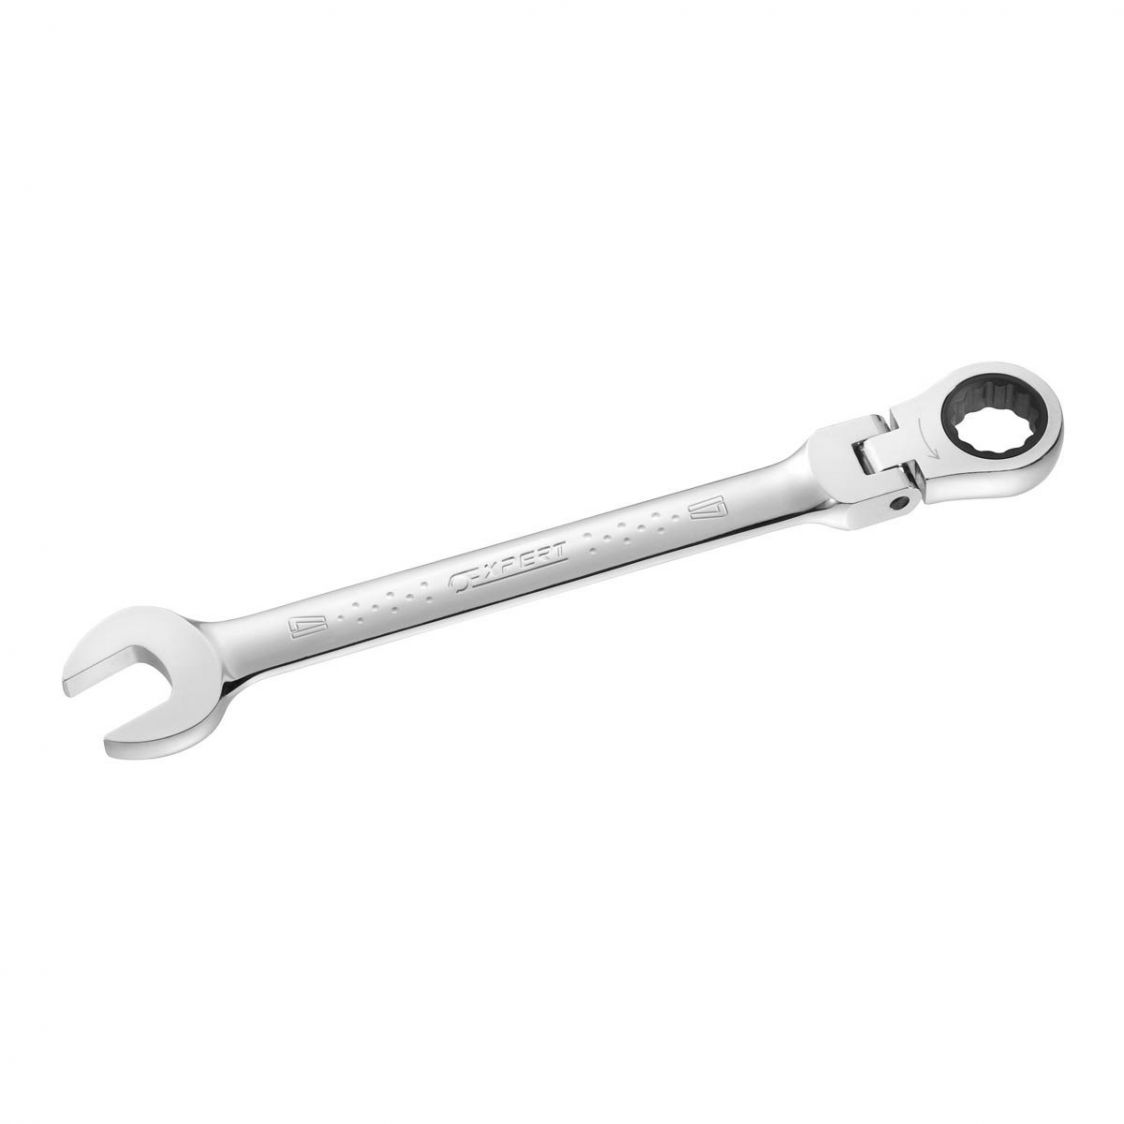 EXPERT by FACOM E110902 - 9mm Metric Hinged Ratchet Combination Spanner